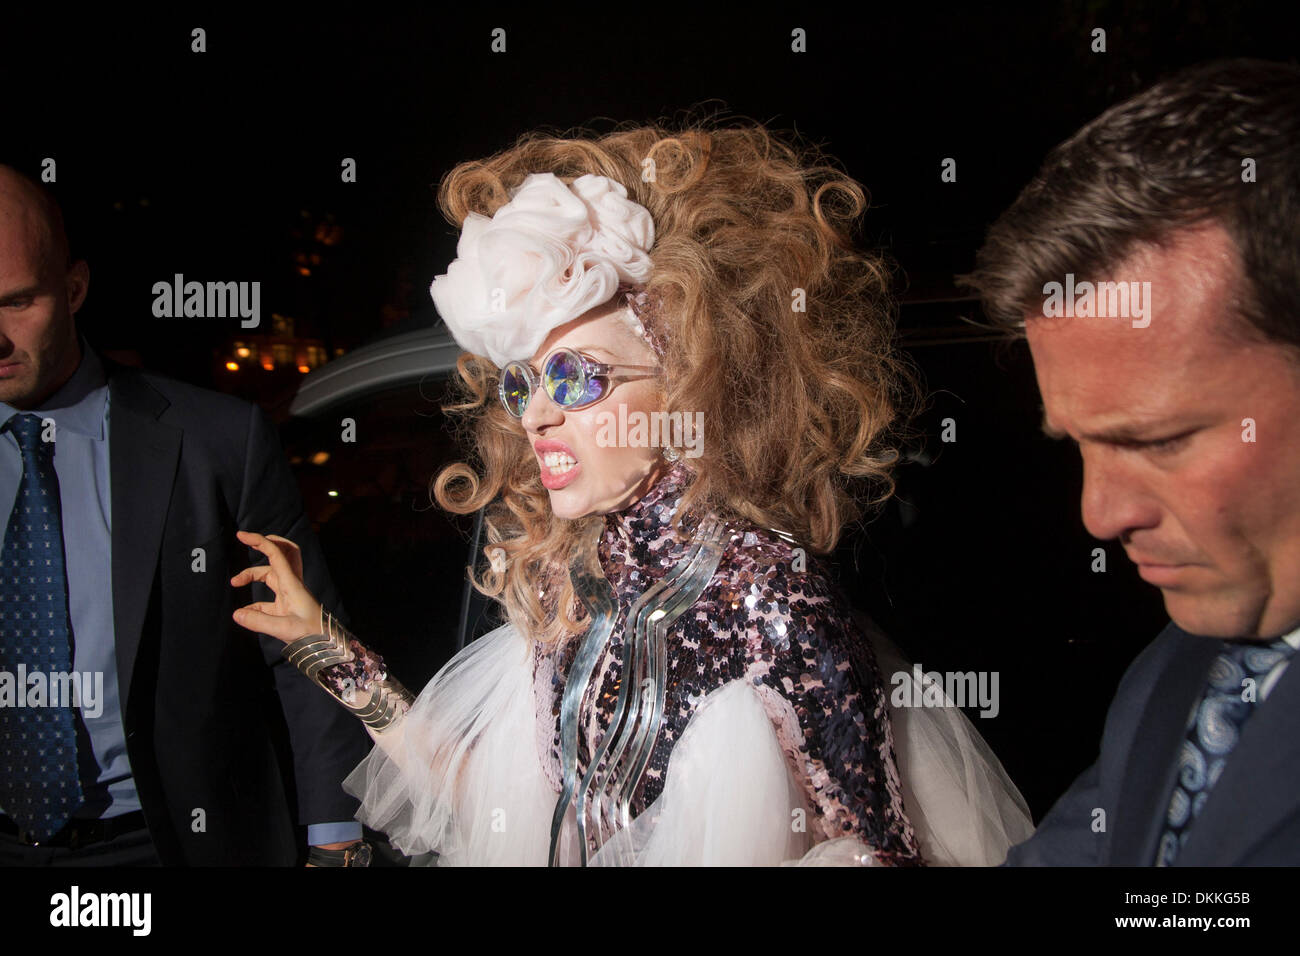 December 6th 2013, London. Lady Gaga arrives at Mayfair's exclusive Annabel's Night Club for an intimate show. Credit:  Paul Davey/Alamy Live News Stock Photo